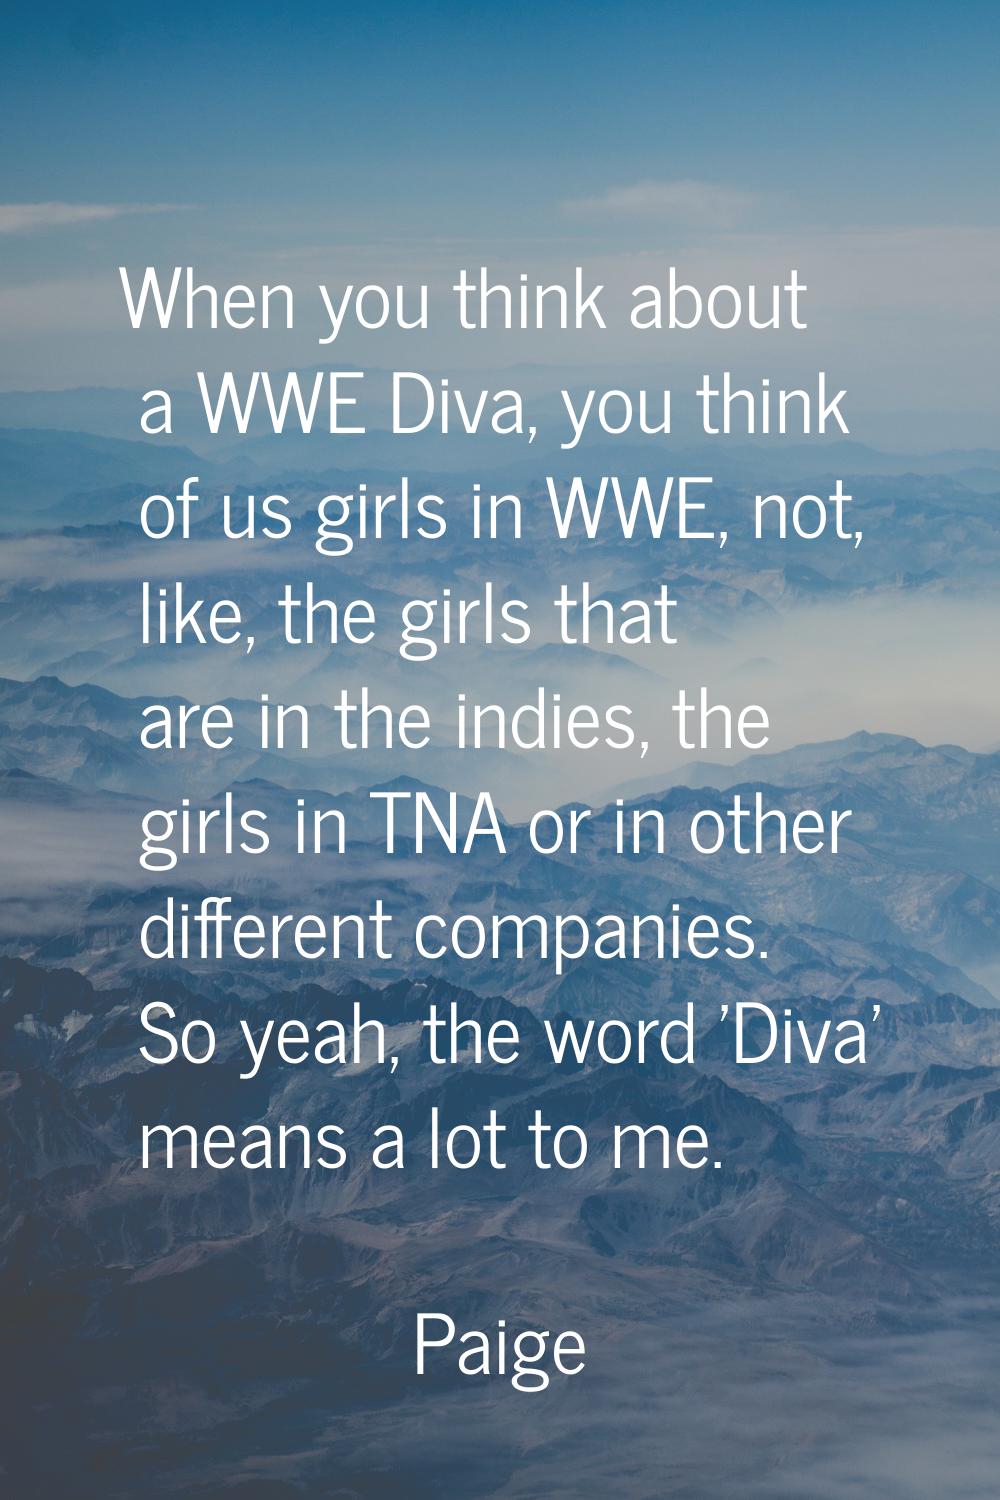 When you think about a WWE Diva, you think of us girls in WWE, not, like, the girls that are in the